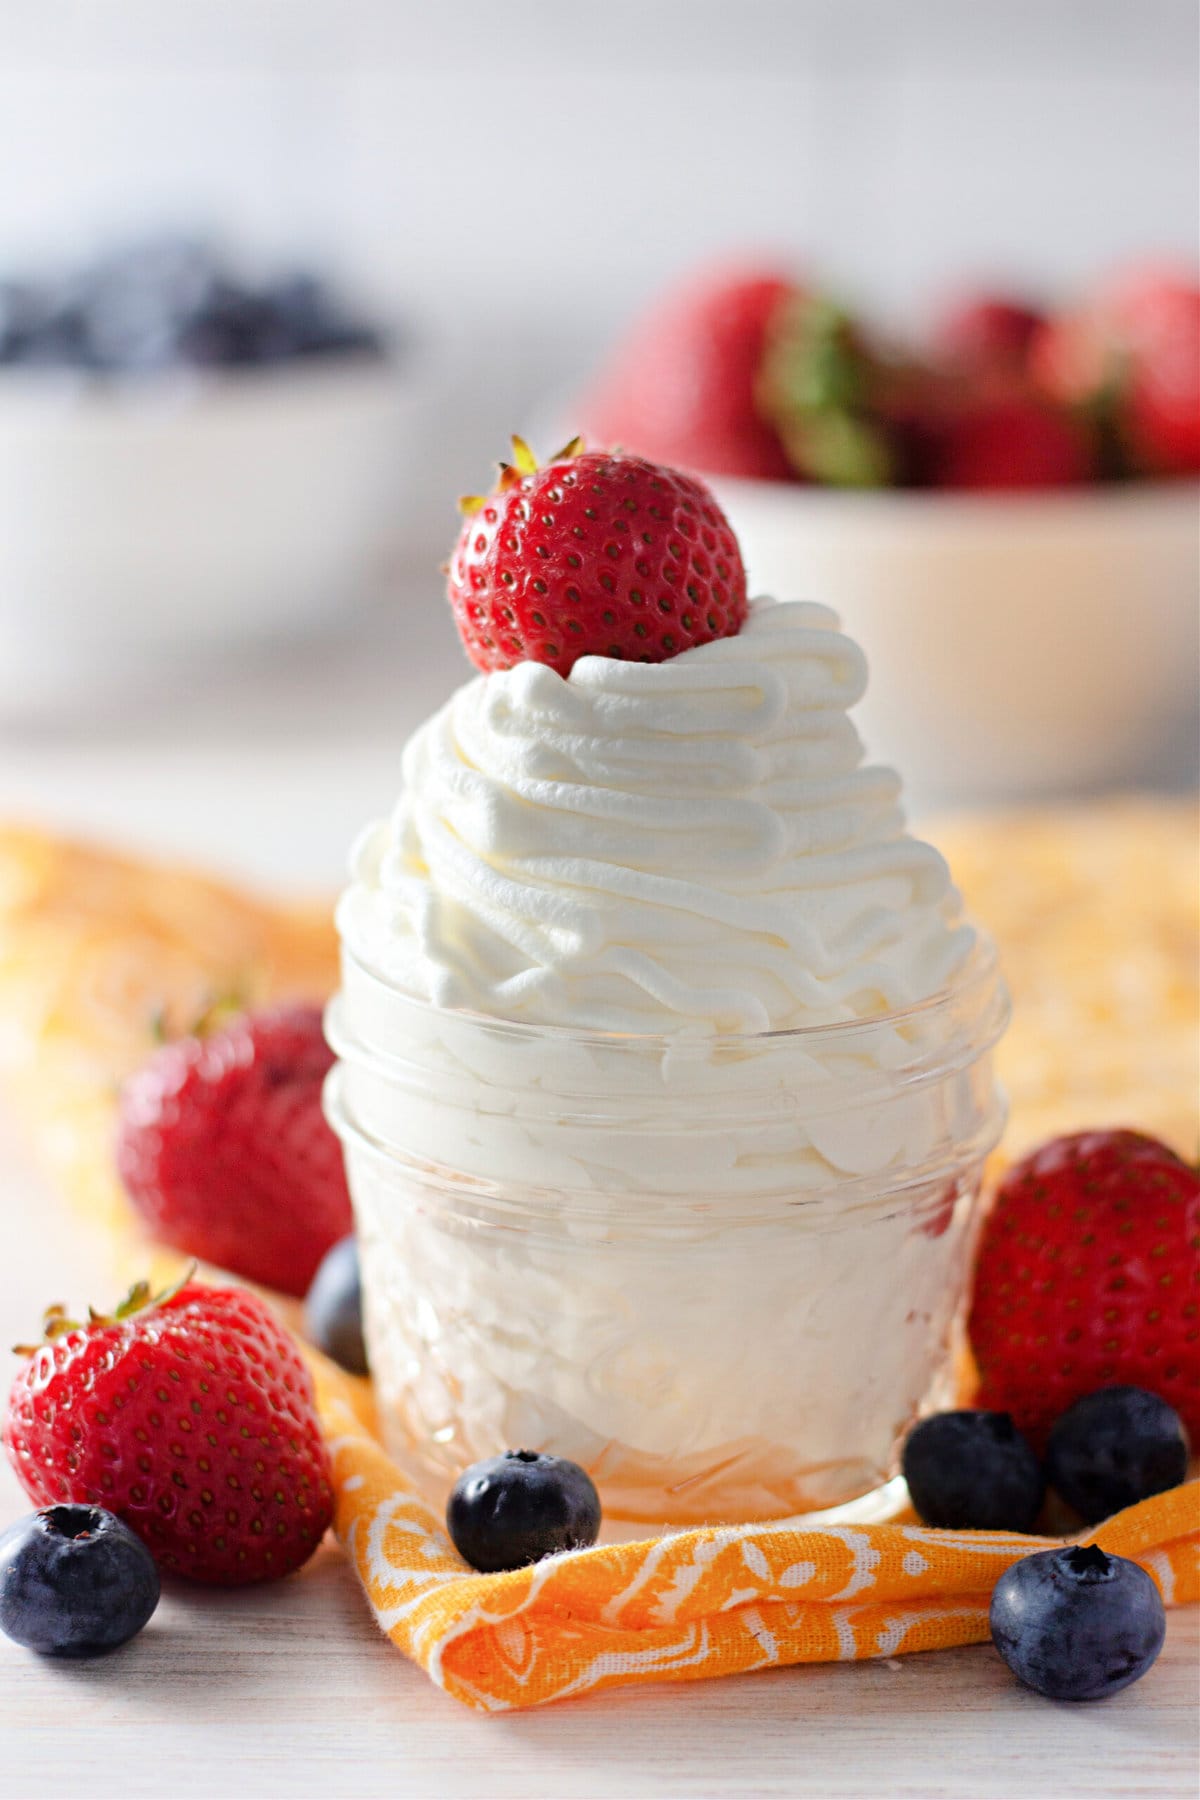 homemade whipped cream with a strawberry on top